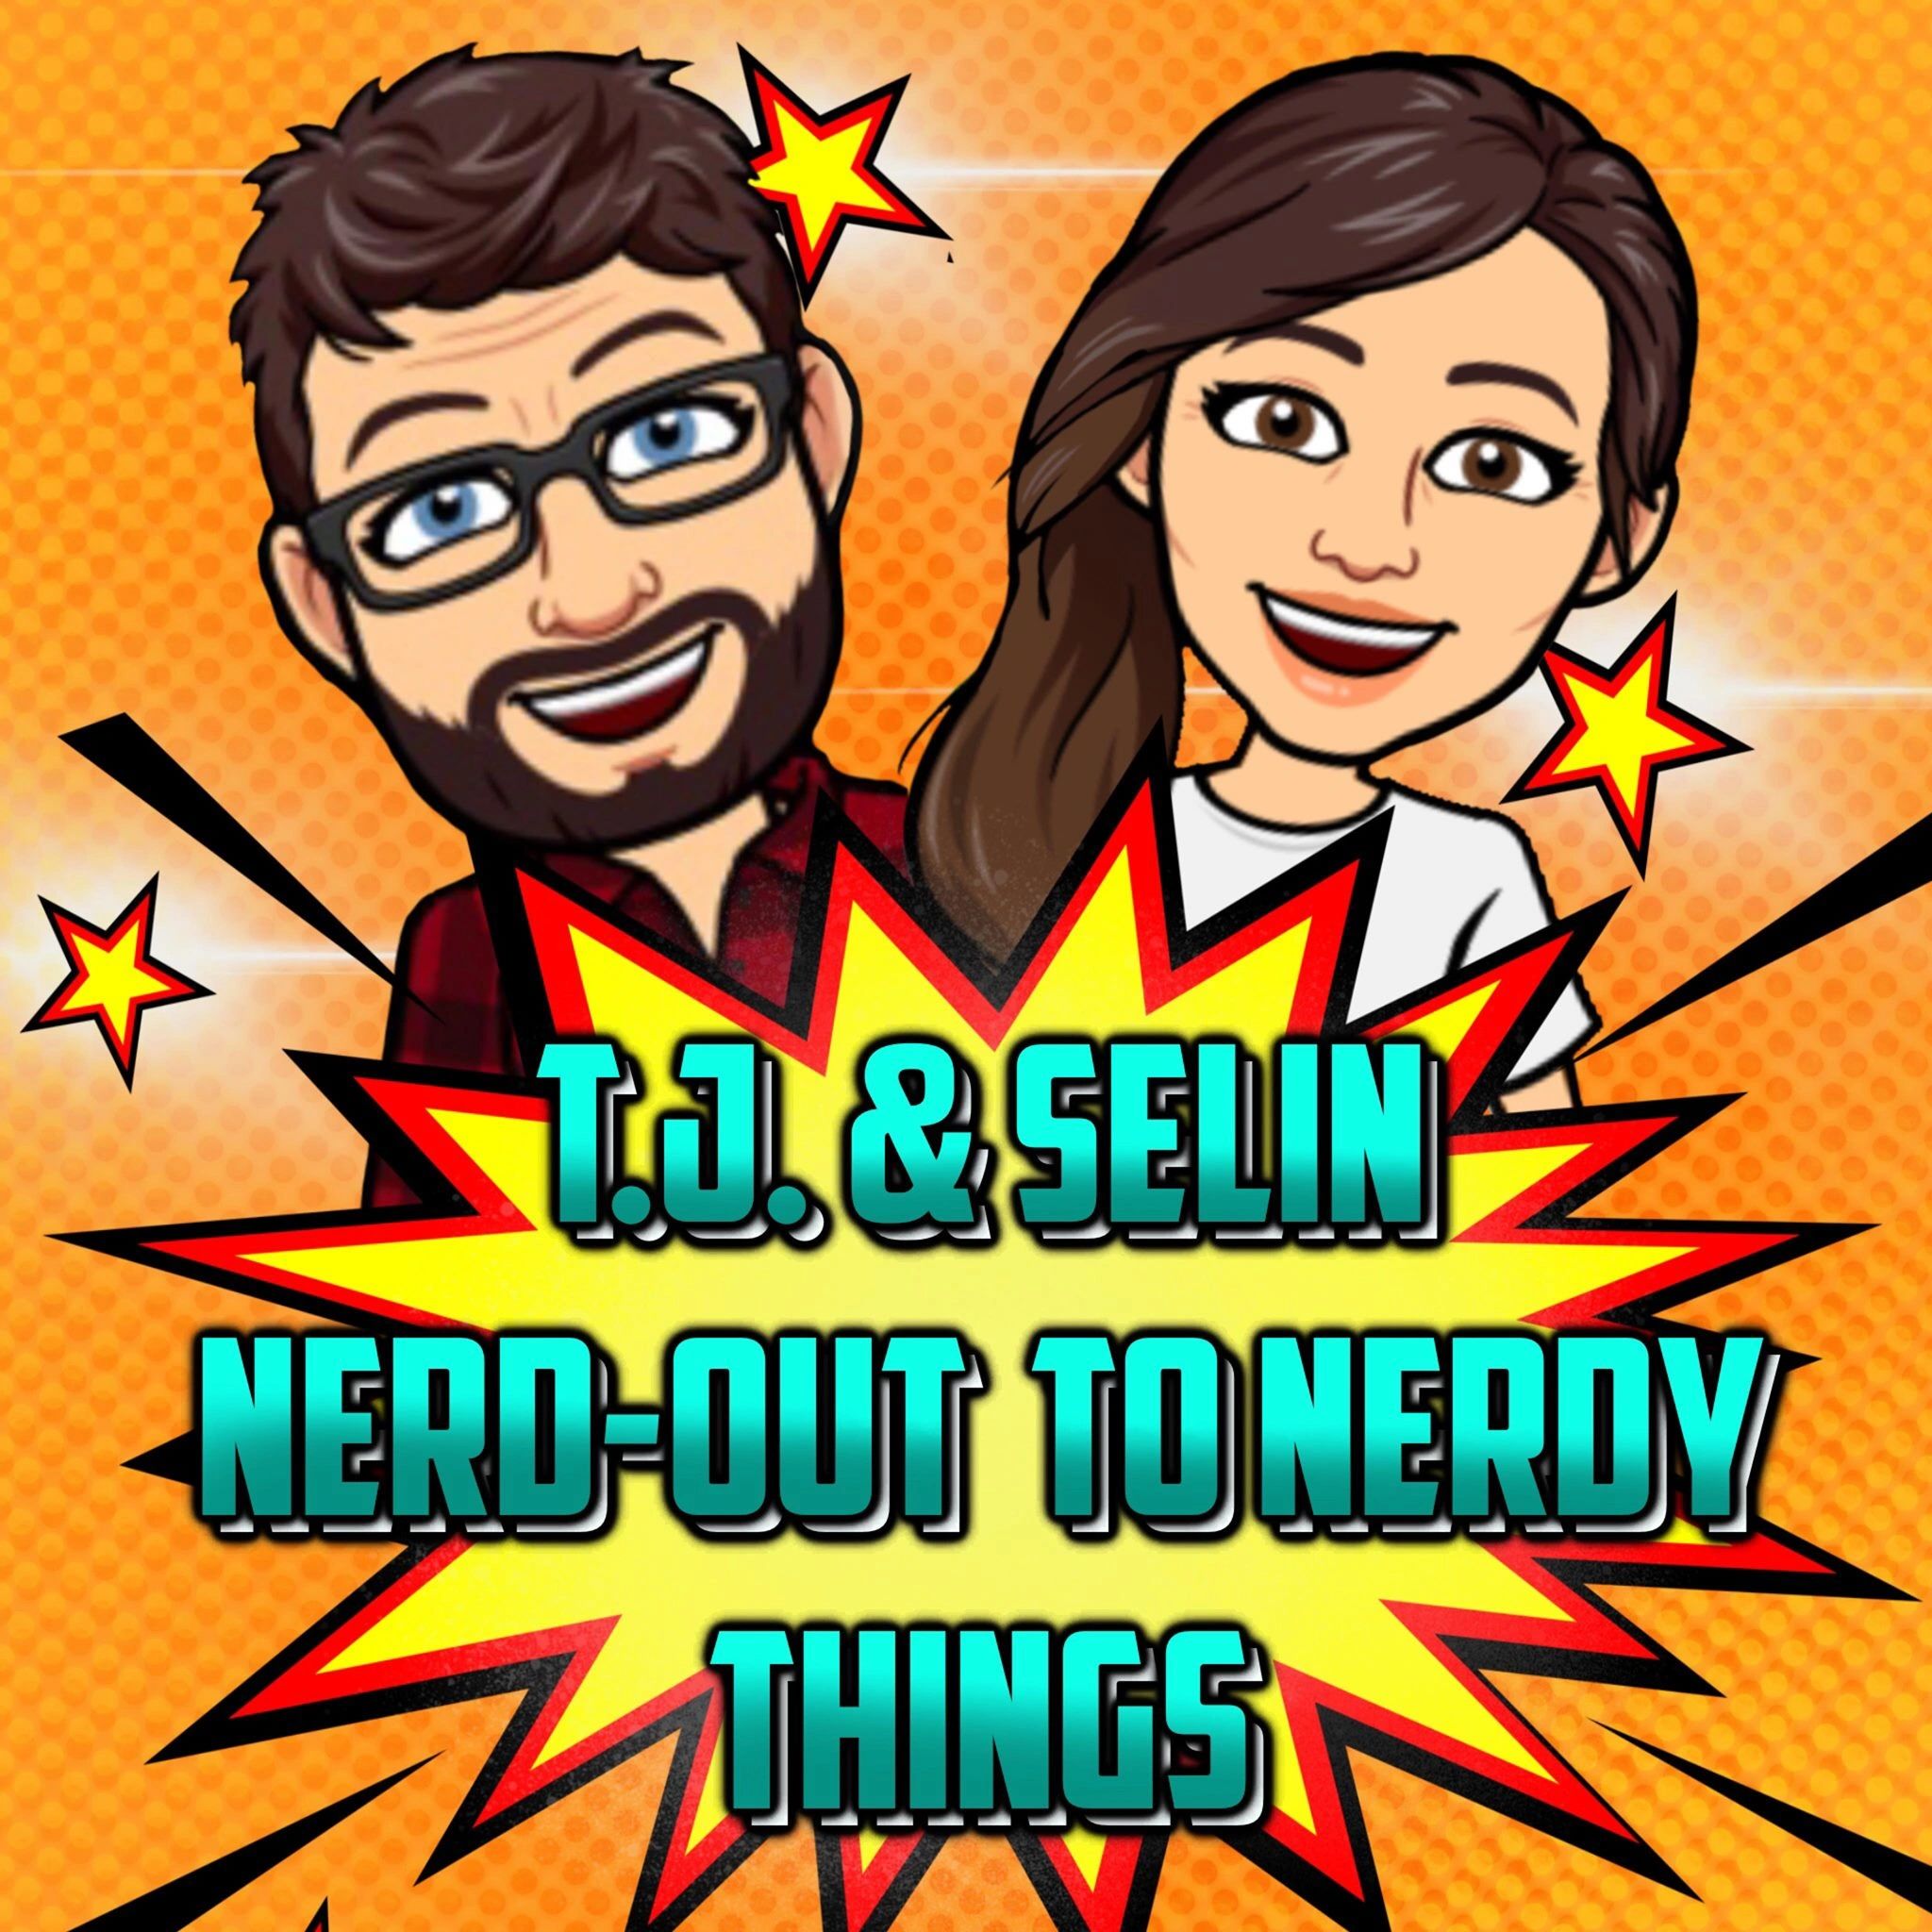 T.J. & Selin Nerd-Out to Nerdy Things